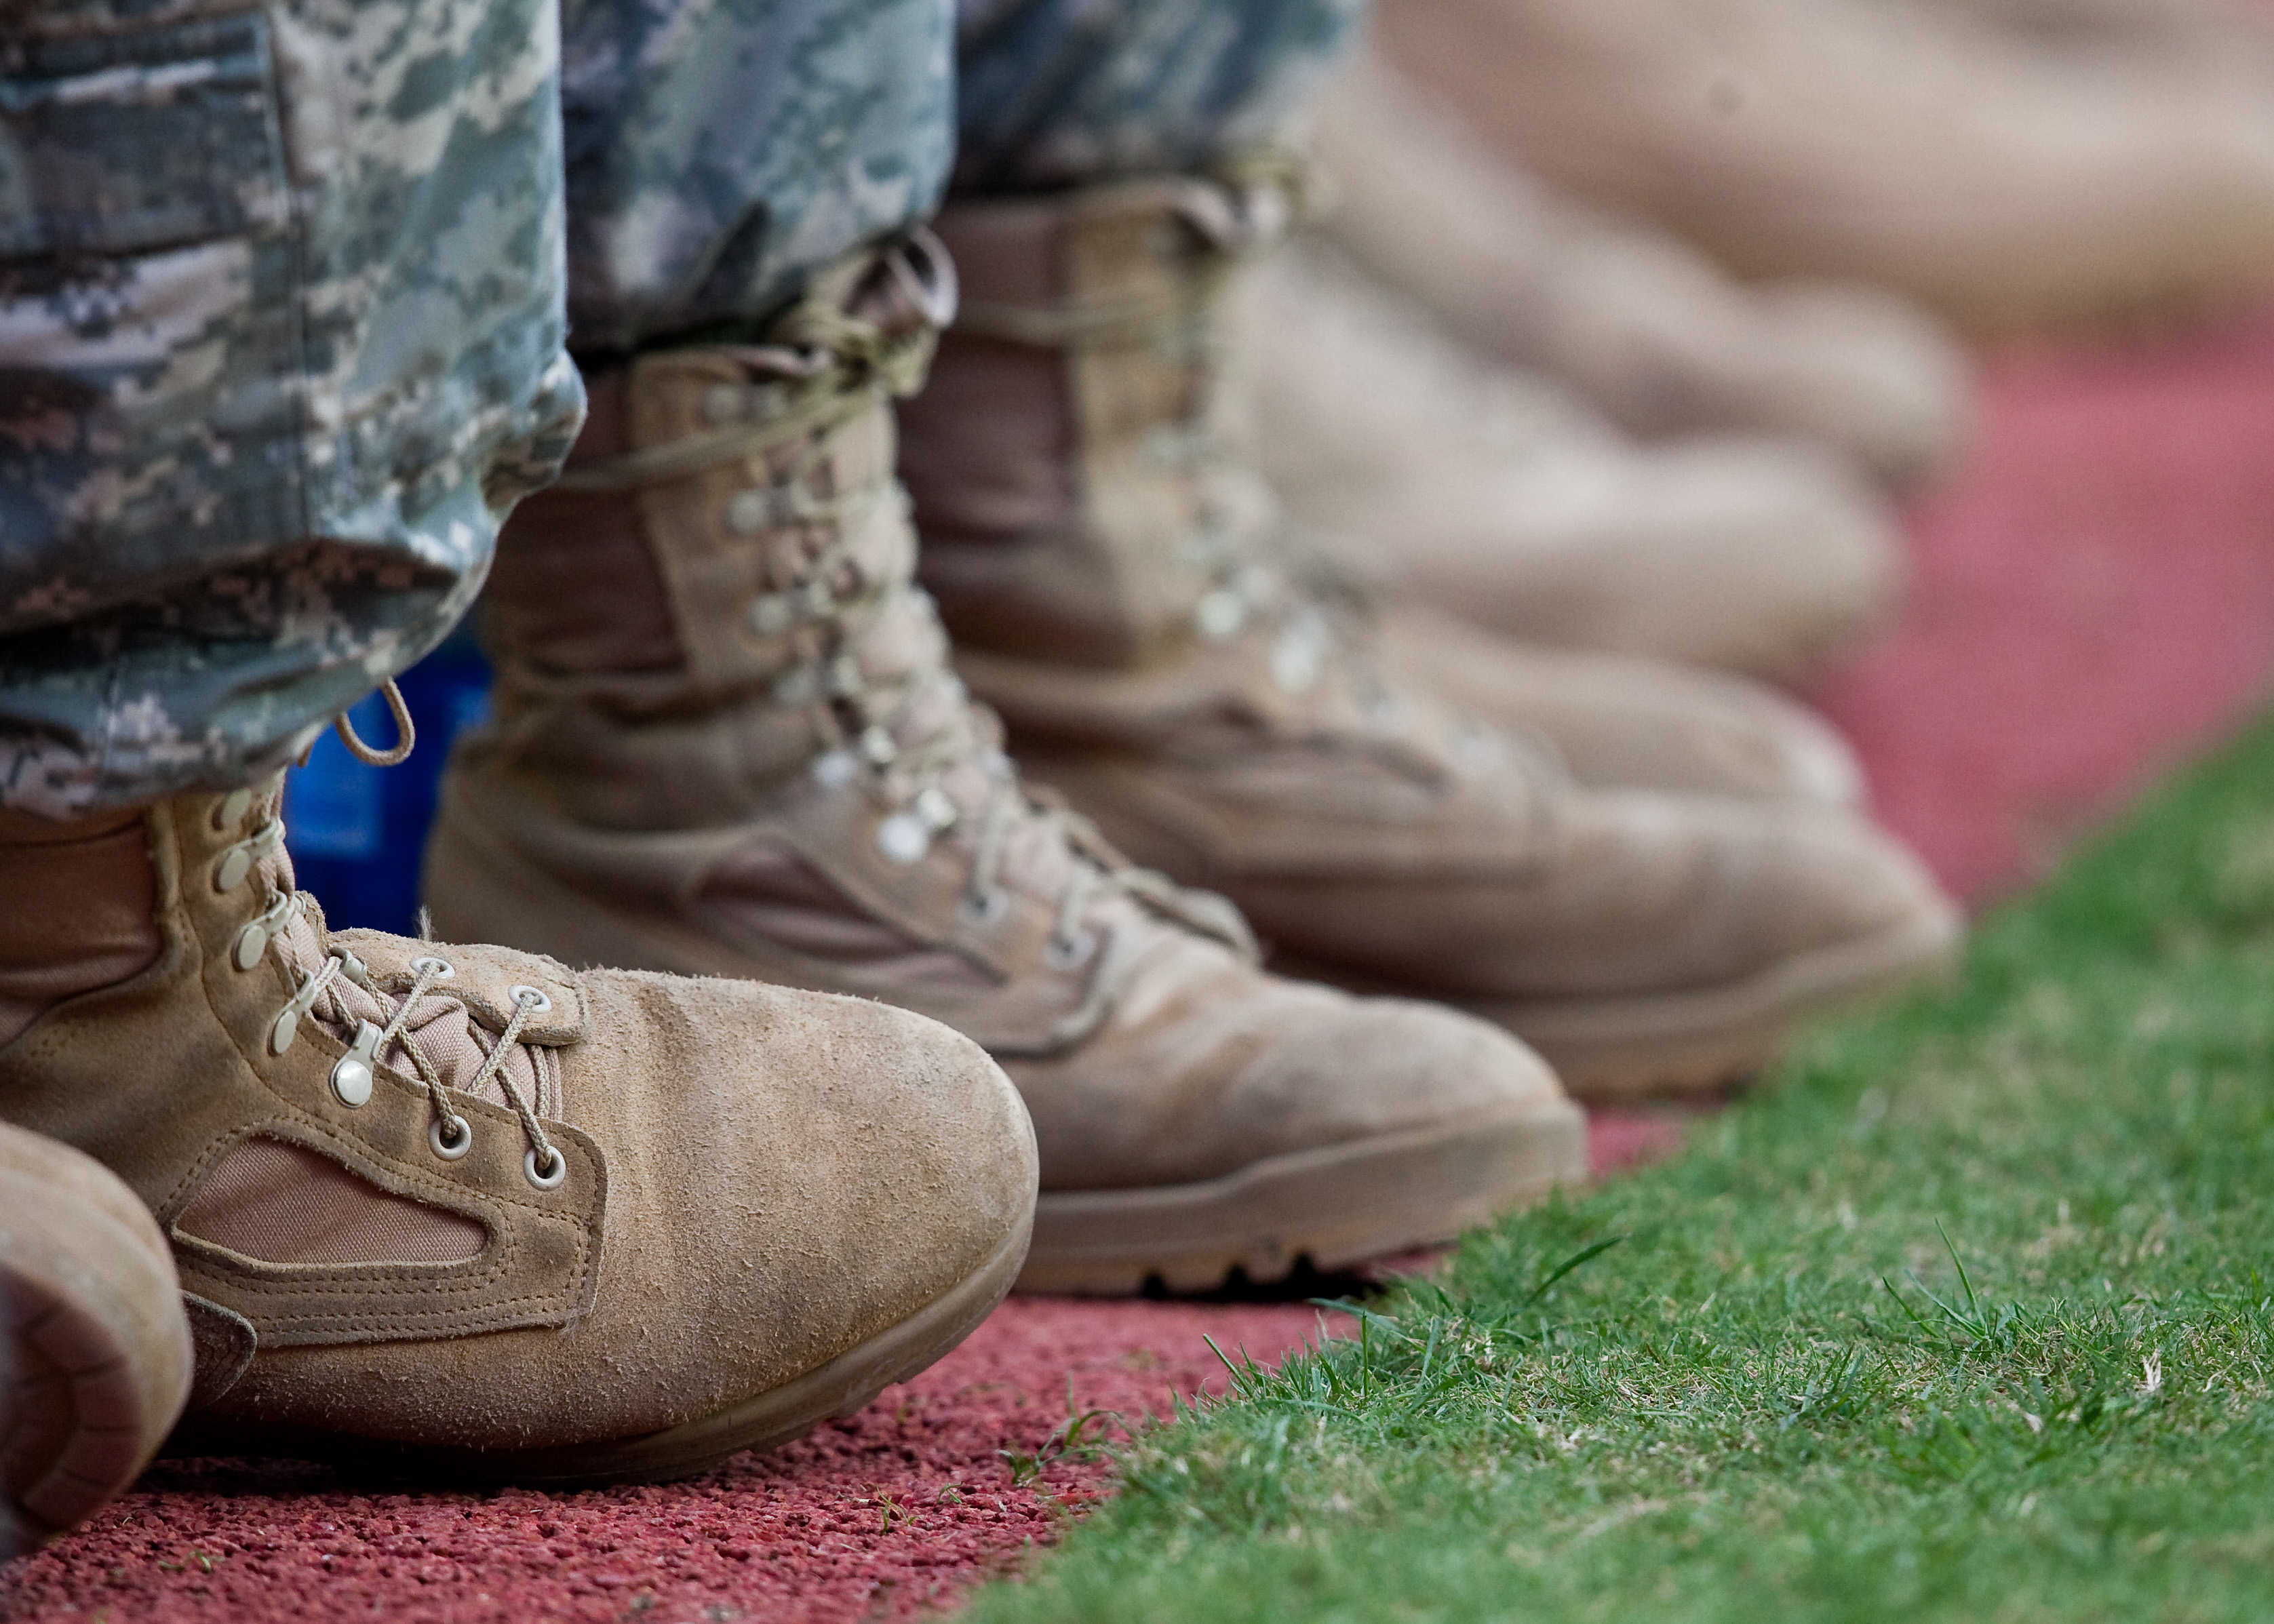 Members of the United States Army watched the game from the field during the San Diego Chargers 37-7 win over the Kansas City Chiefs at Arrowhead Stadium in Kansas City, Missouri. (Icon Sports Wire&mdash;Corbis via Getty Images)